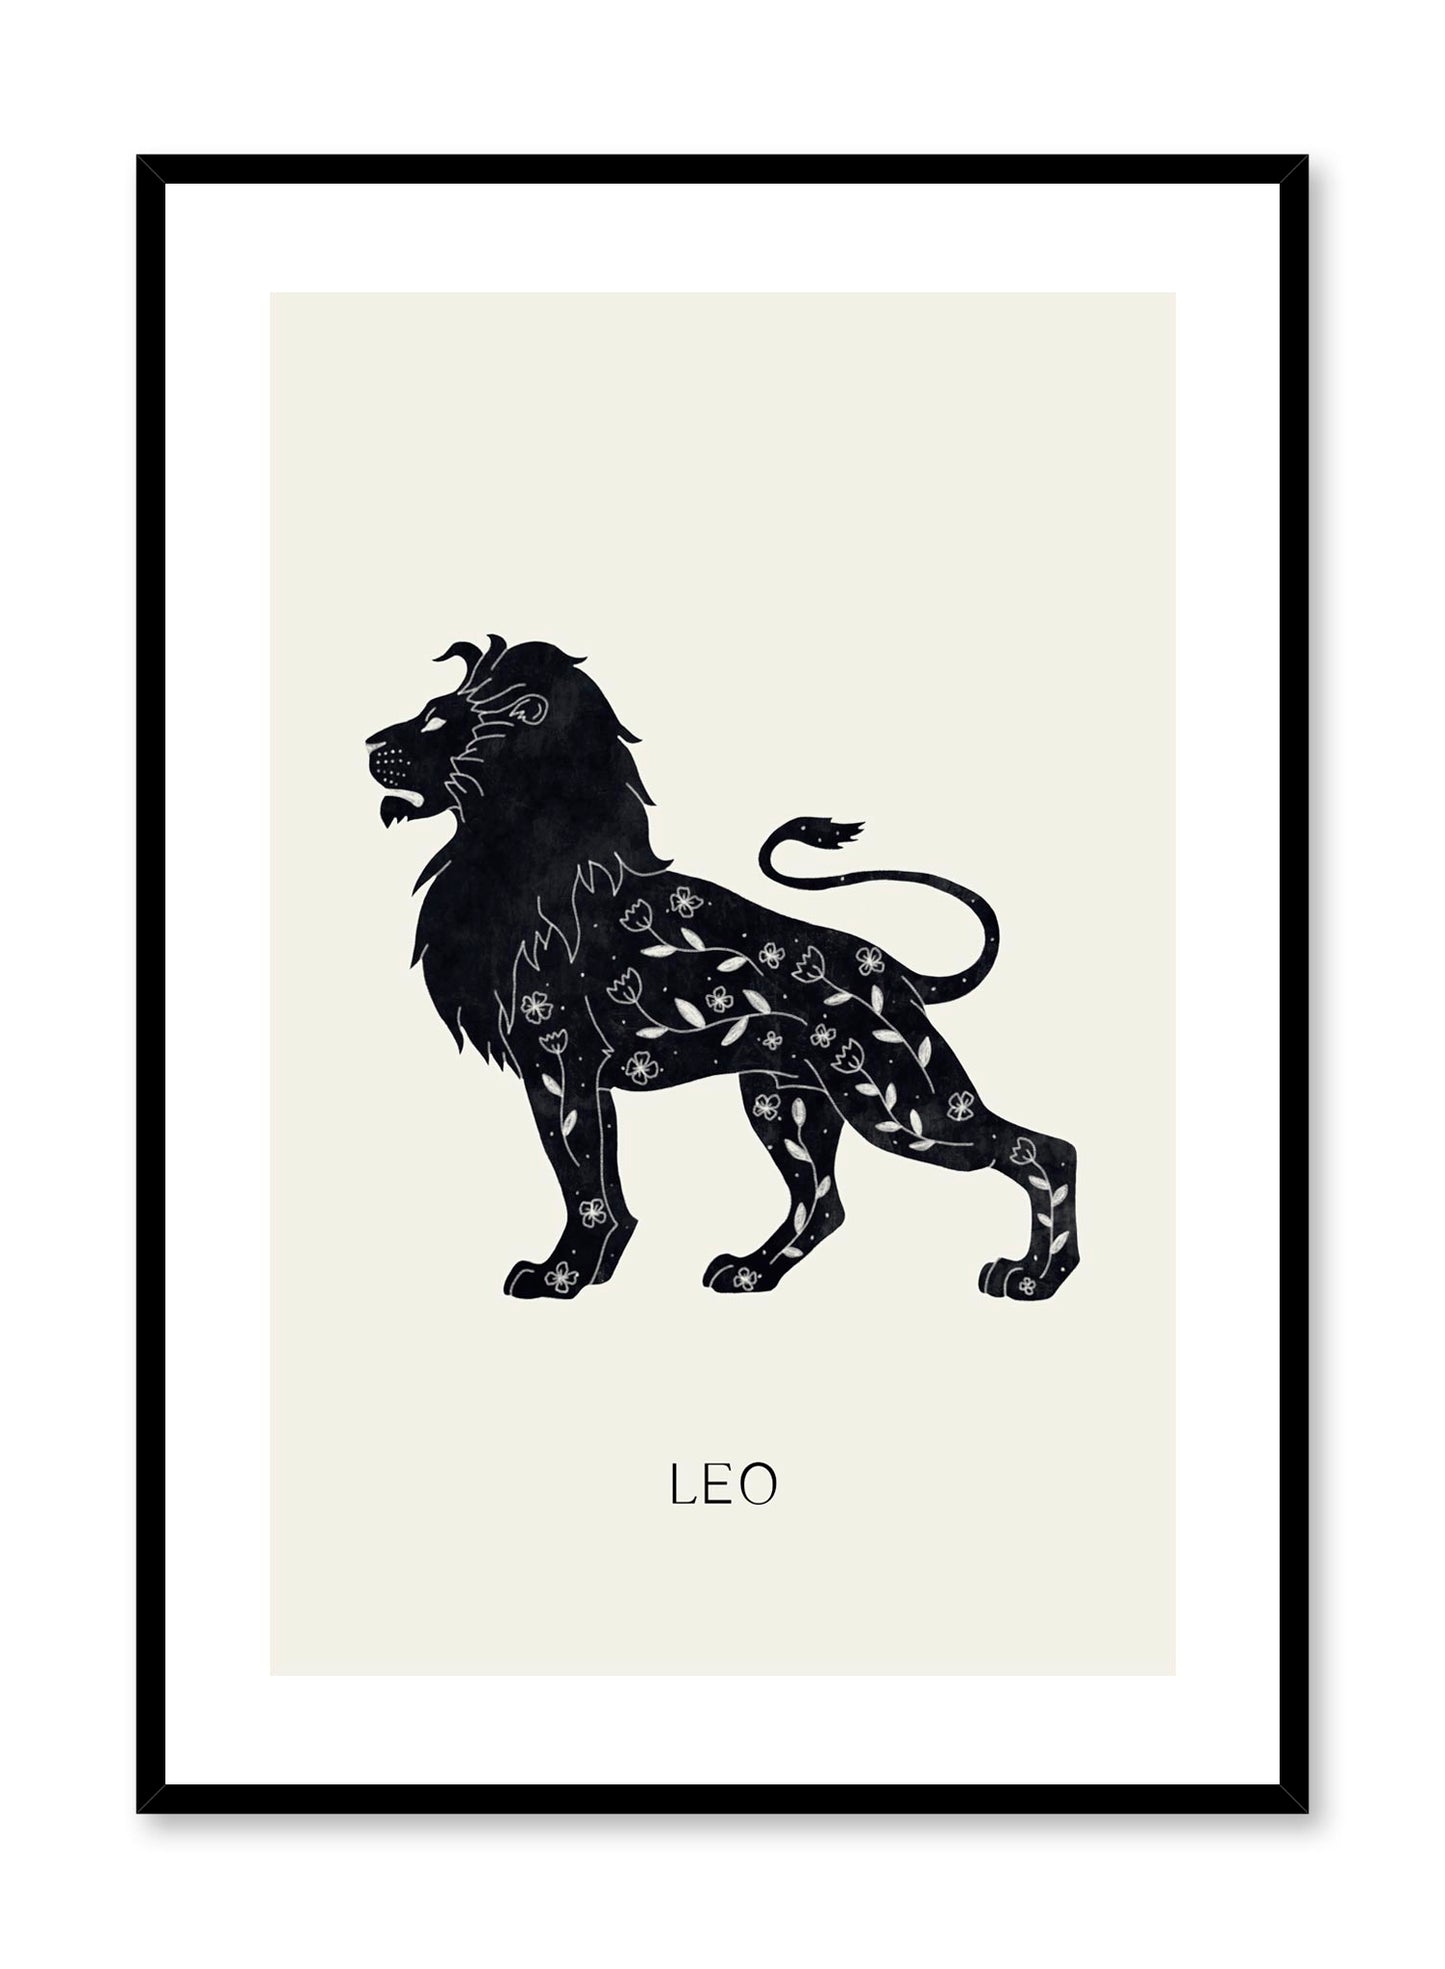 Celestial illustration poster by Opposite Wall with horoscope zodiac of Leo